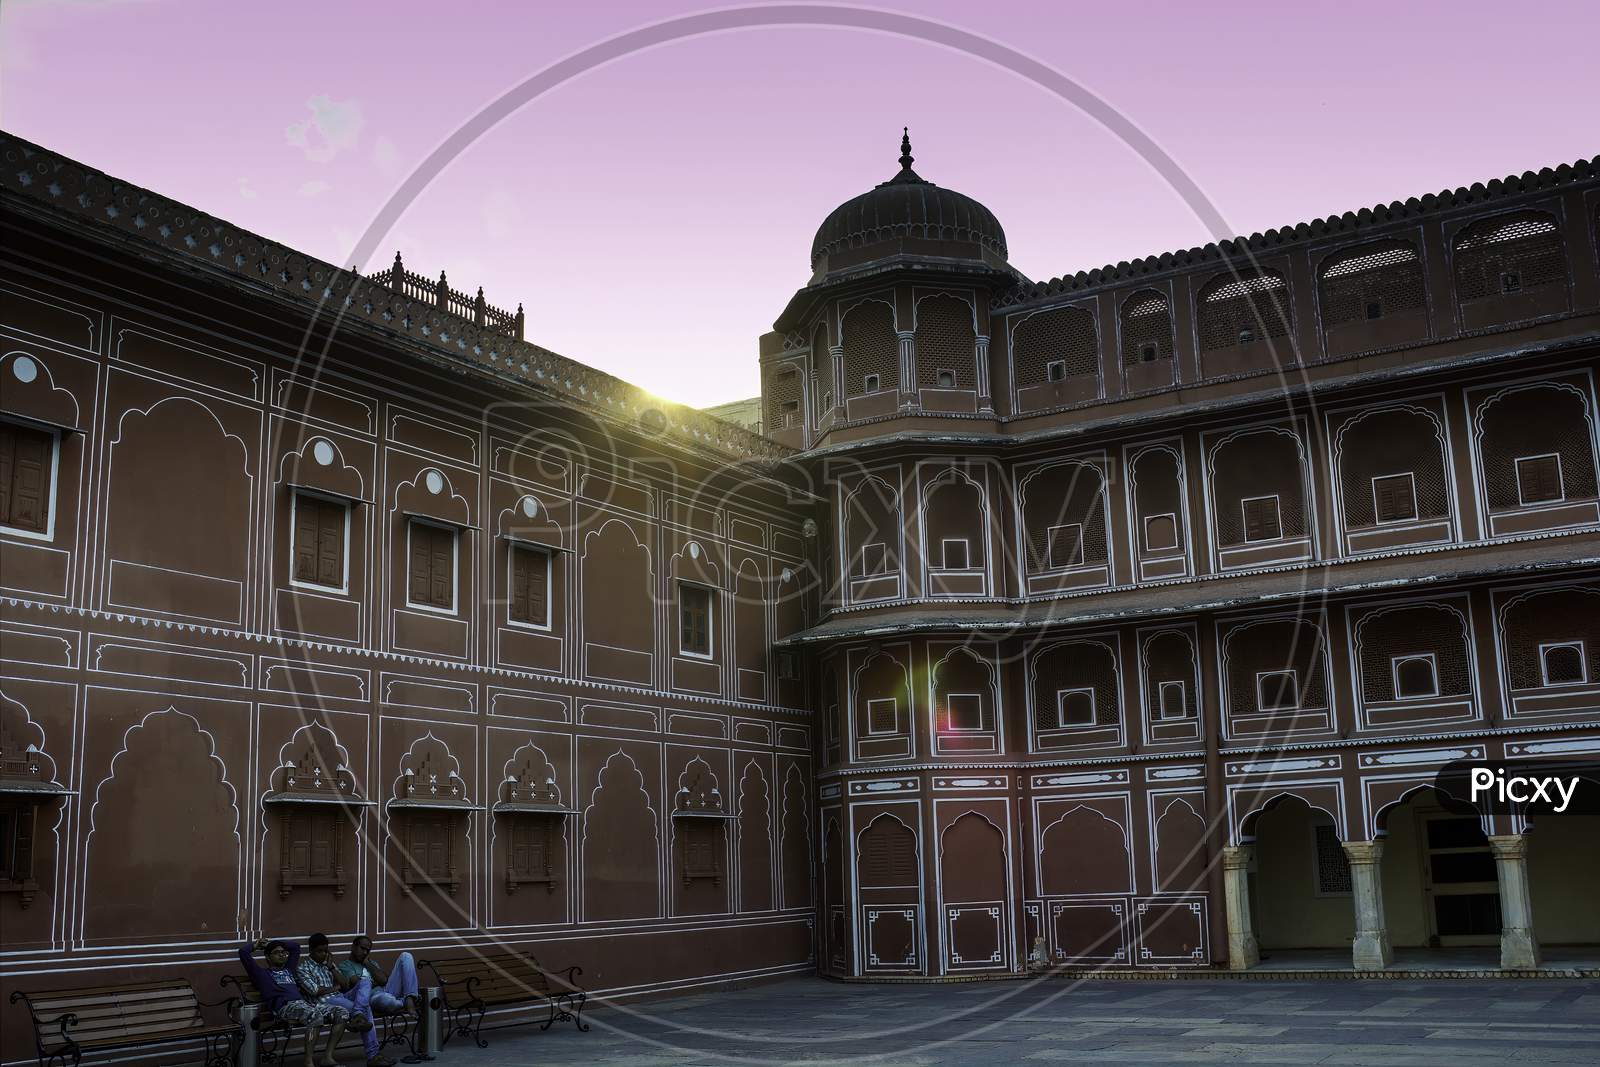 Jaipur, India - October 21, 2012: An Exterior Of A Royal City Palace Opened As One Of The Tourist Attraction